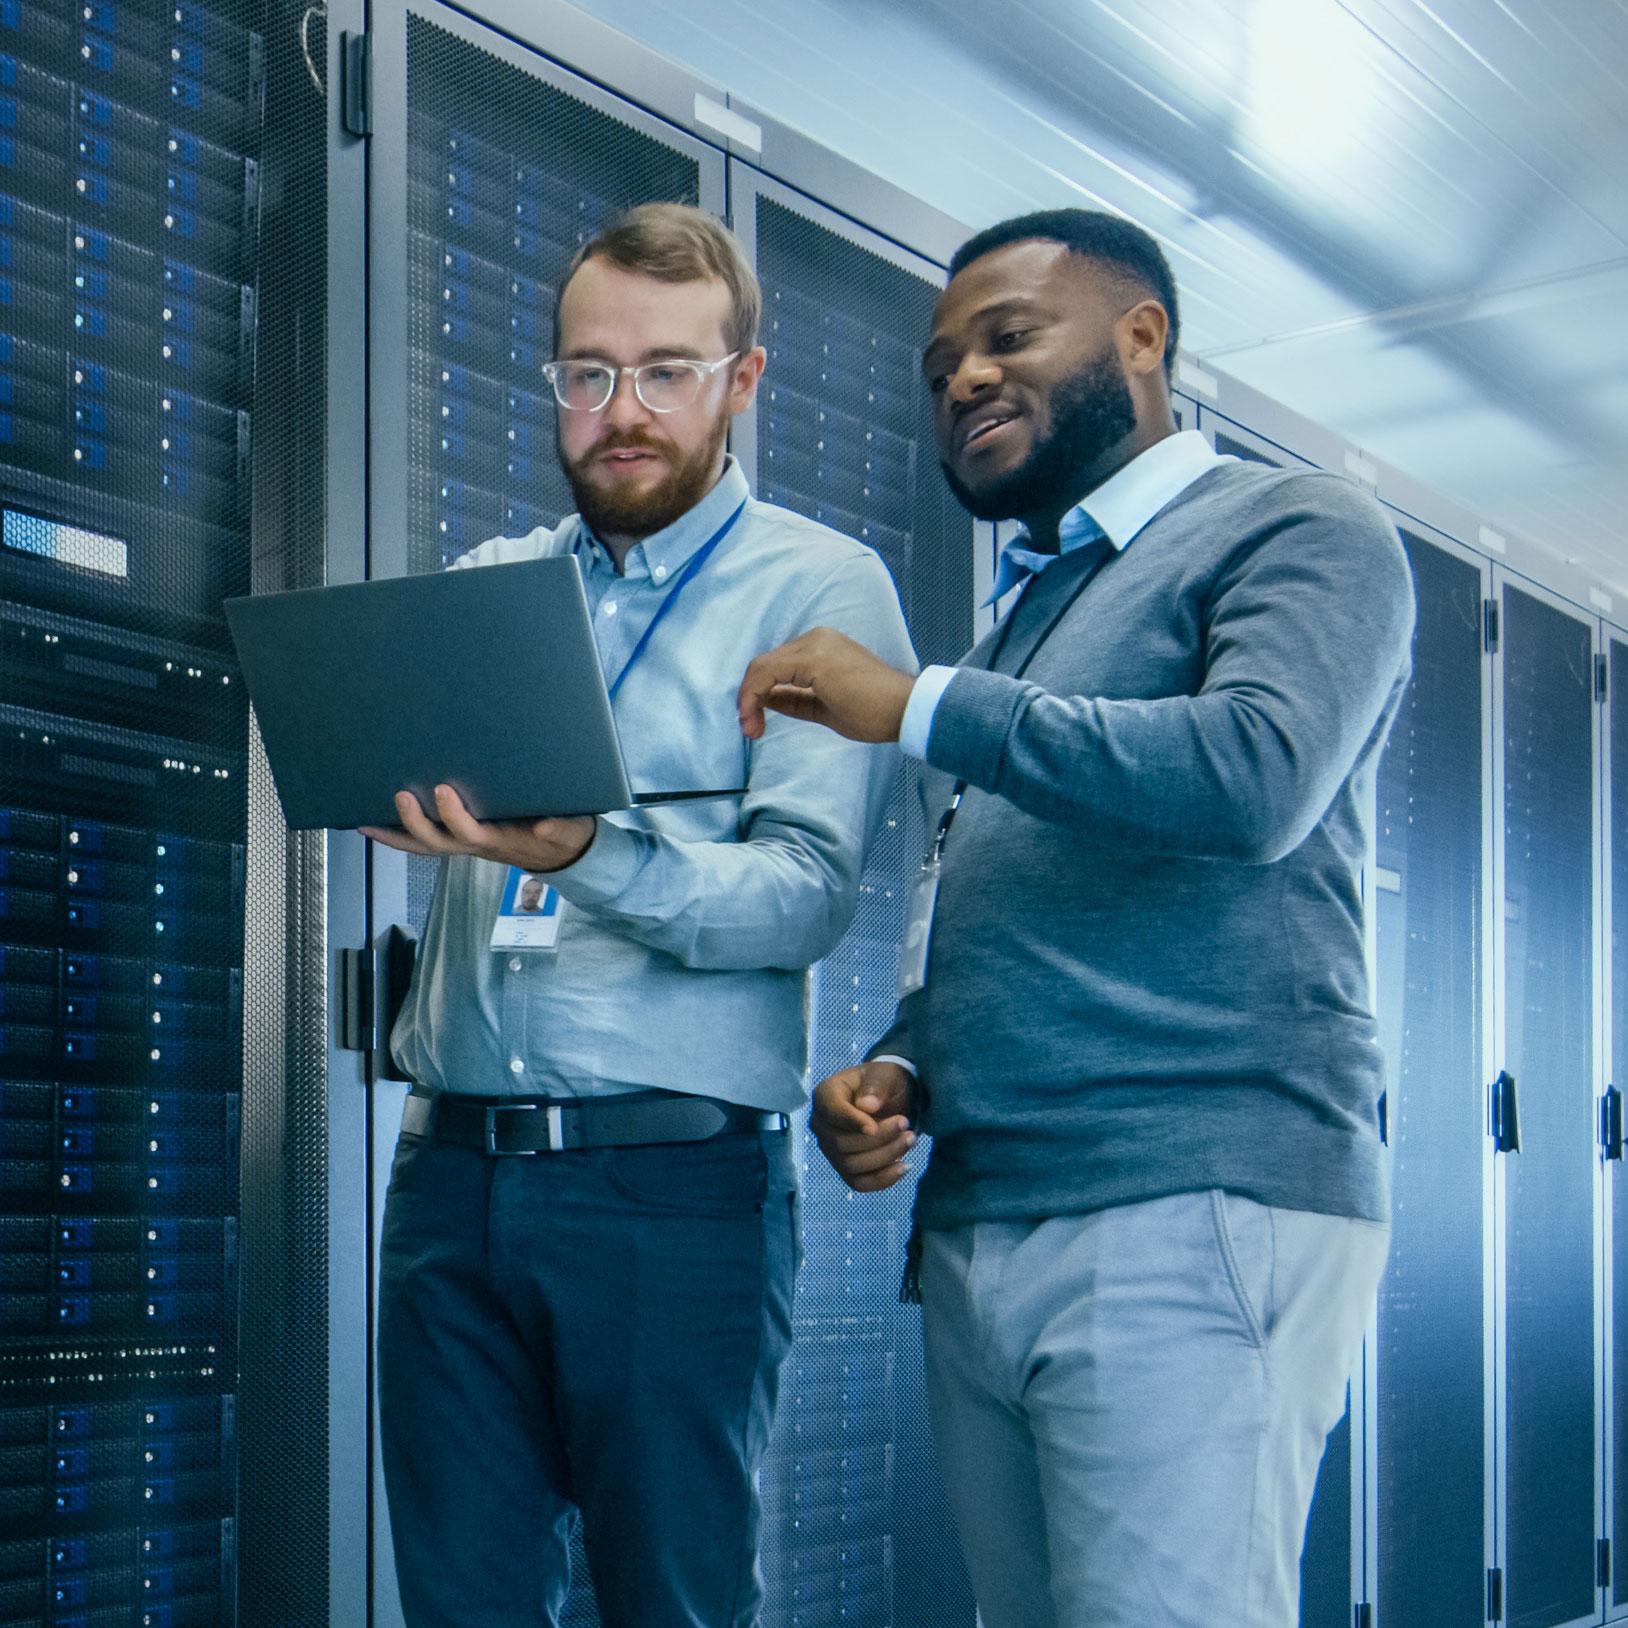 Two male coworkers looking at a laptop in a data center